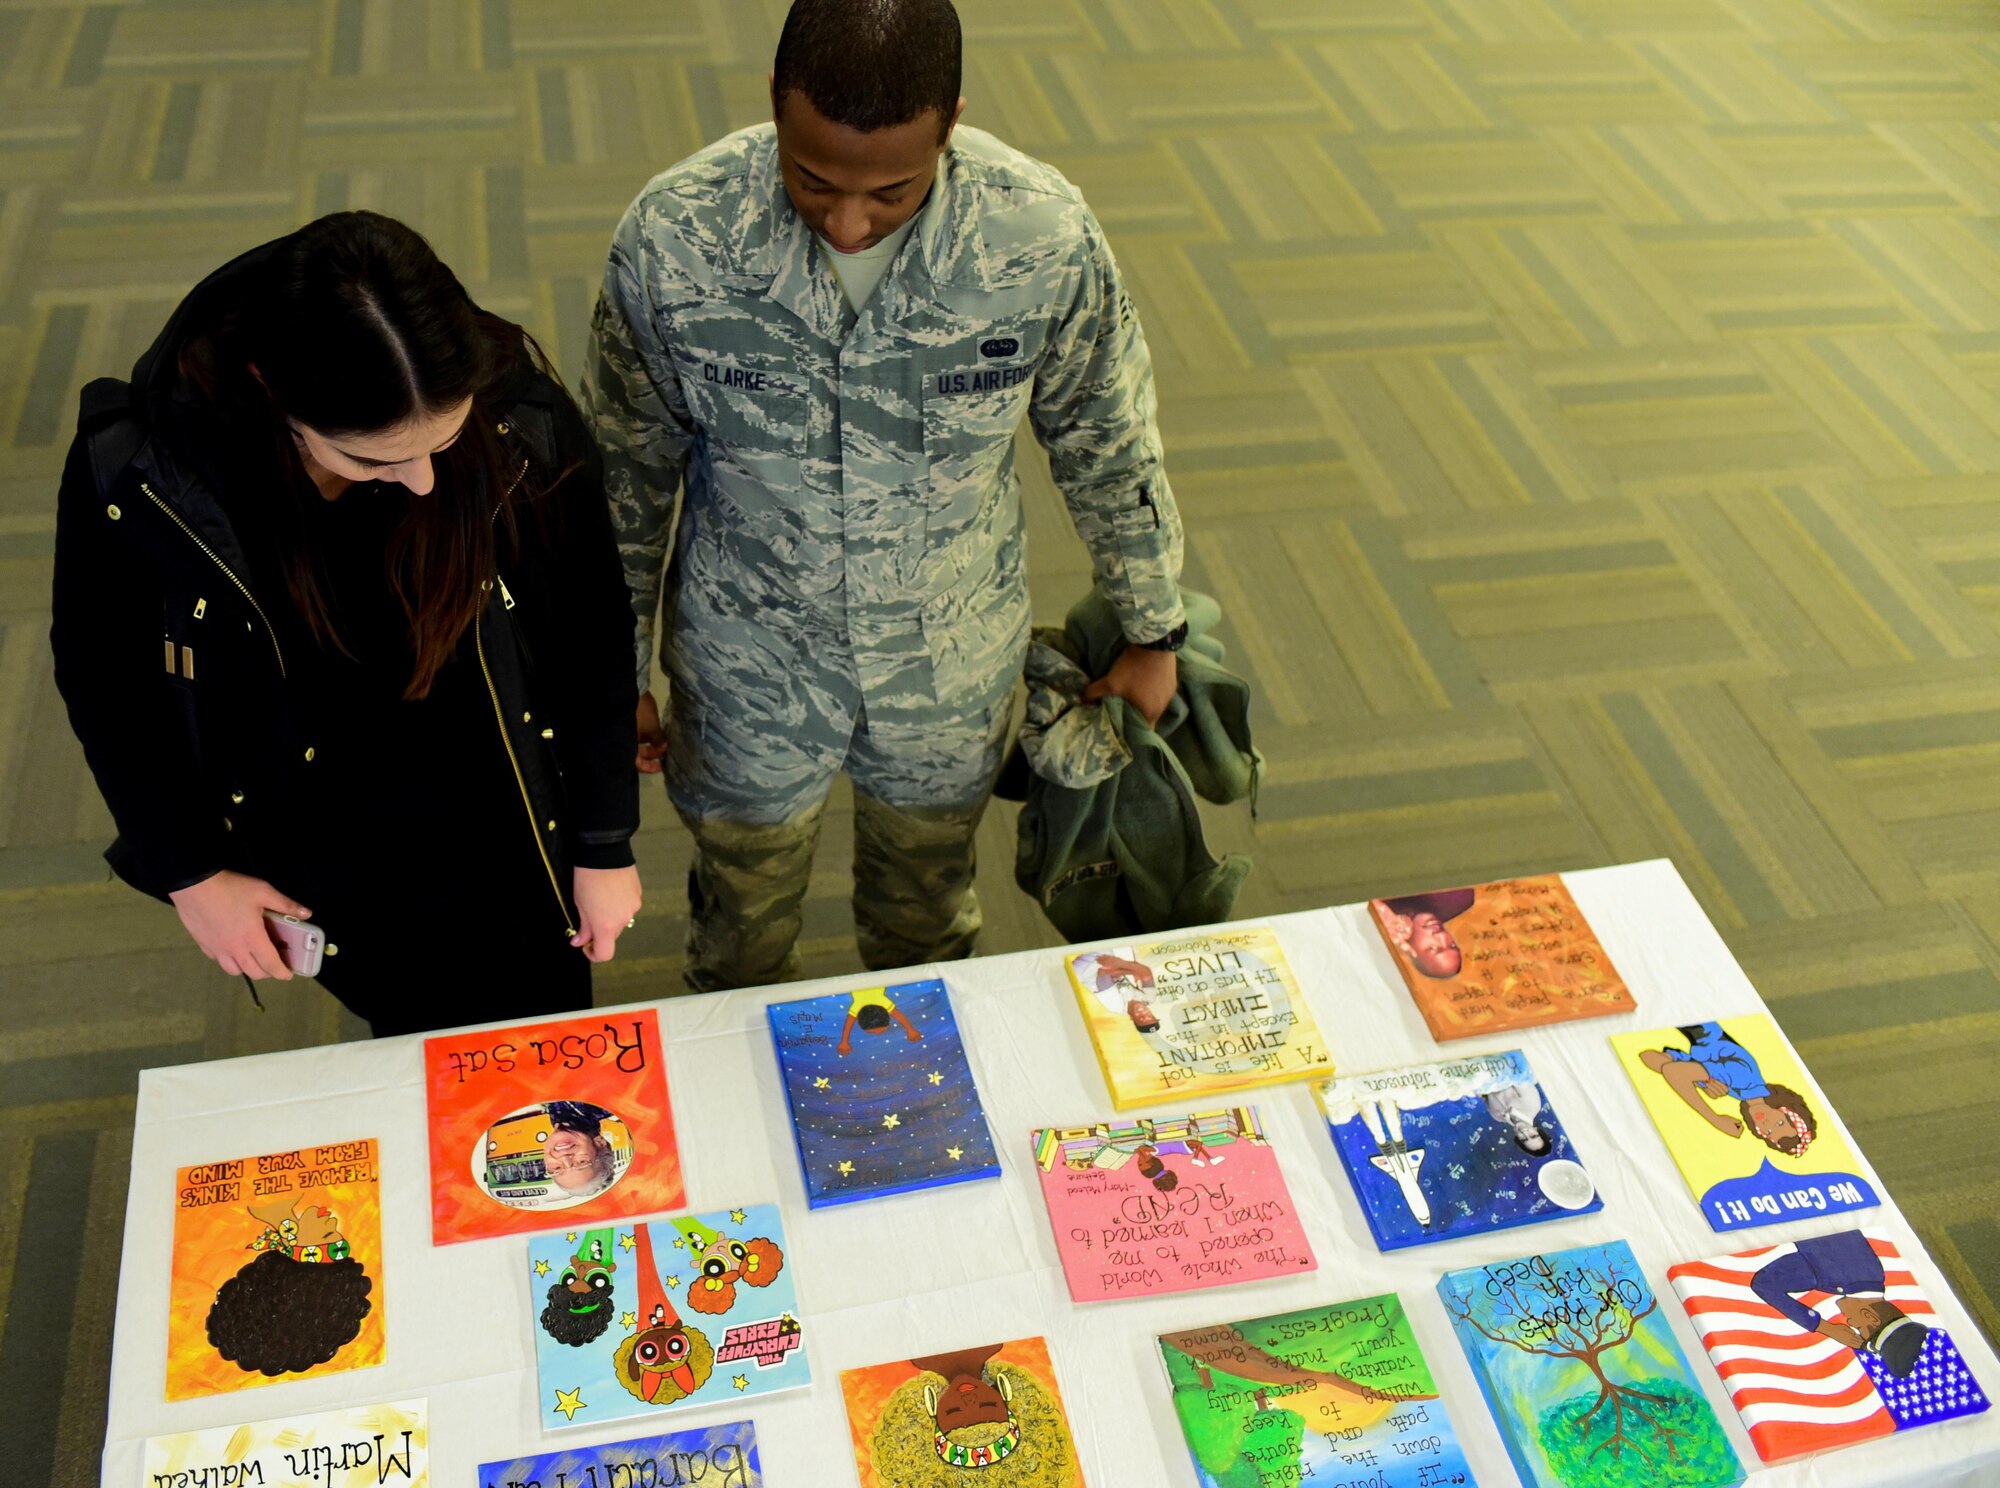 Samantha Clark and her husband Senior Airman Jason Clark, a unit deployment manager assigned to the 28th Communications Squadron, view art during the African American Heritage Month celebration inside the Deployment Center at Ellsworth Air Force Base, S.D., Feb. 28, 2017. The event showcased art submitted from Airmen, high school students and children from the Child Development Center. (U.S. Air Force photo by Airman 1st Class Randahl J. Jenson)     